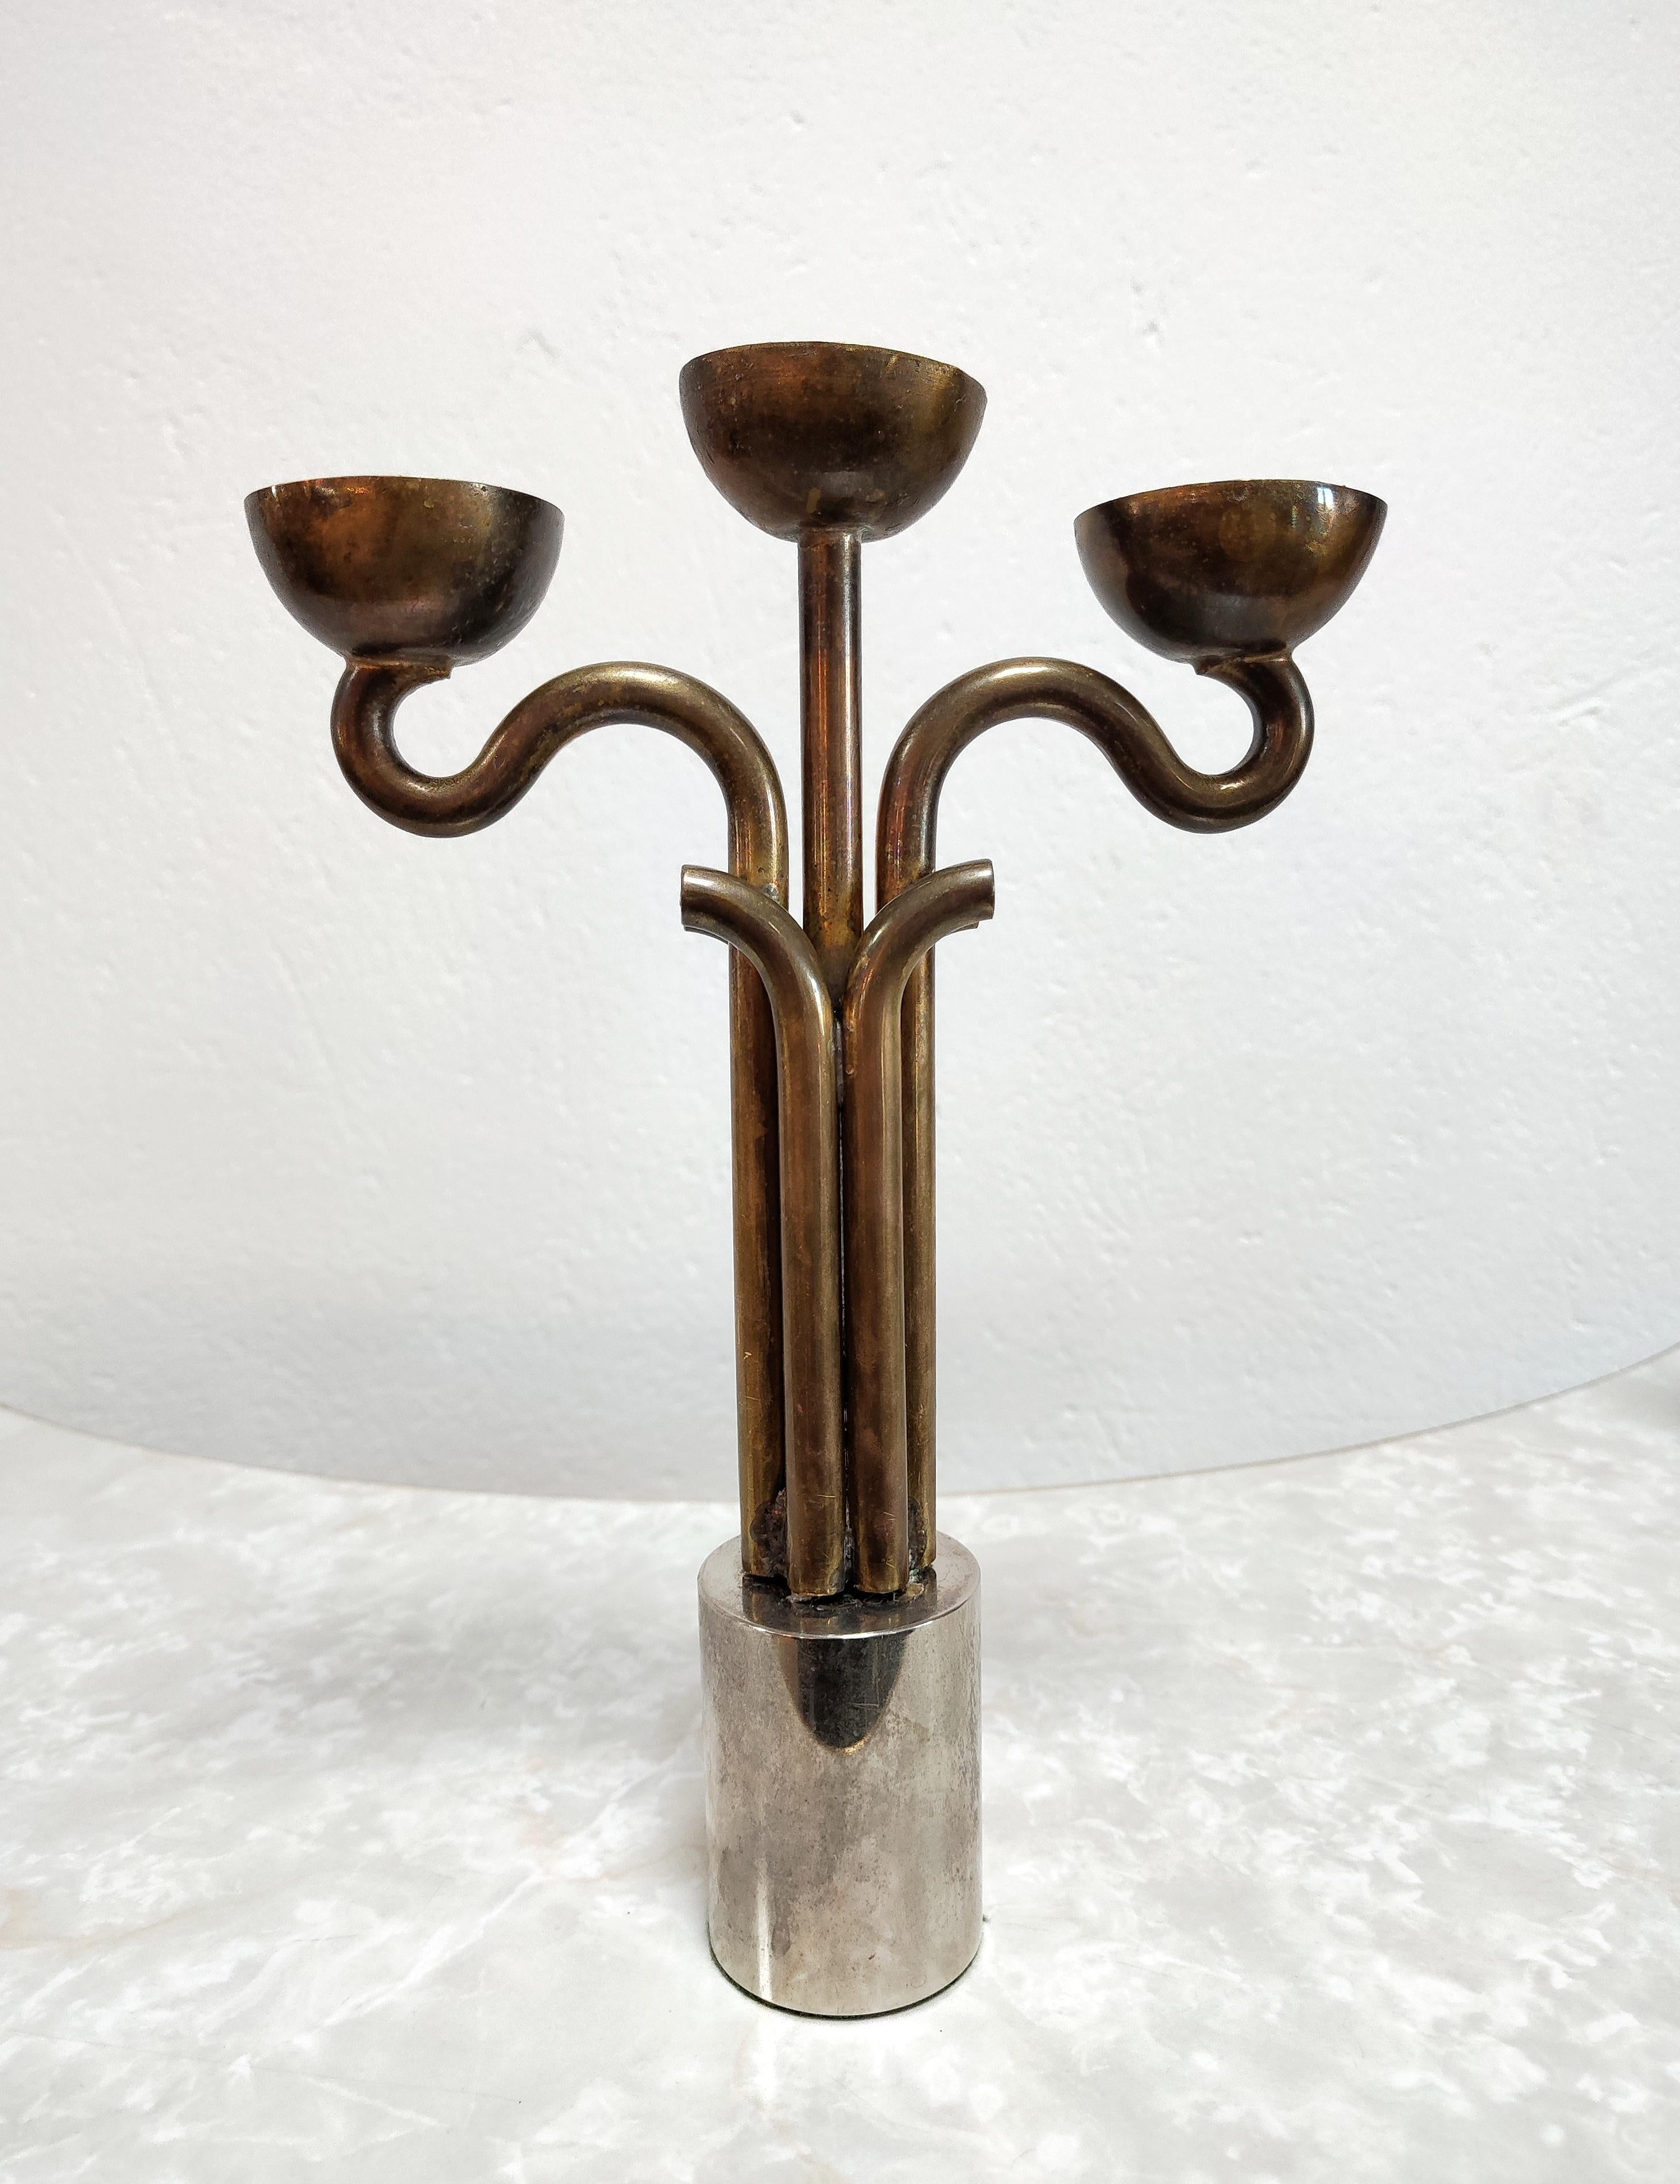 Italian Brutalist Candlestick Holder Done in Brass and Nickel, Italy, 1970s For Sale